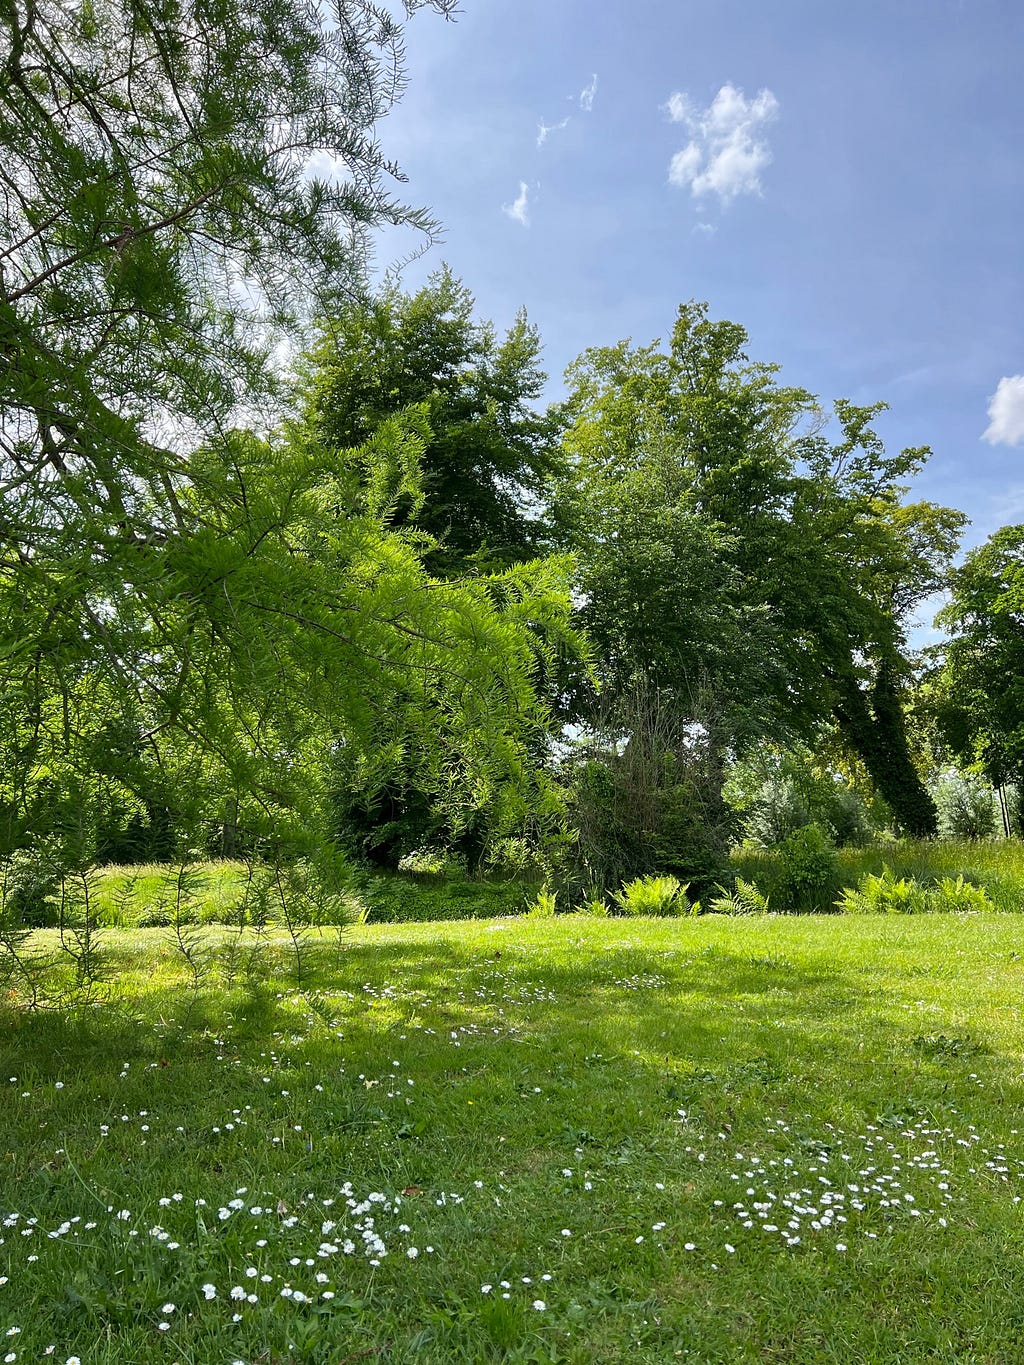 a luscious green park. Grass, trees and a blue sky